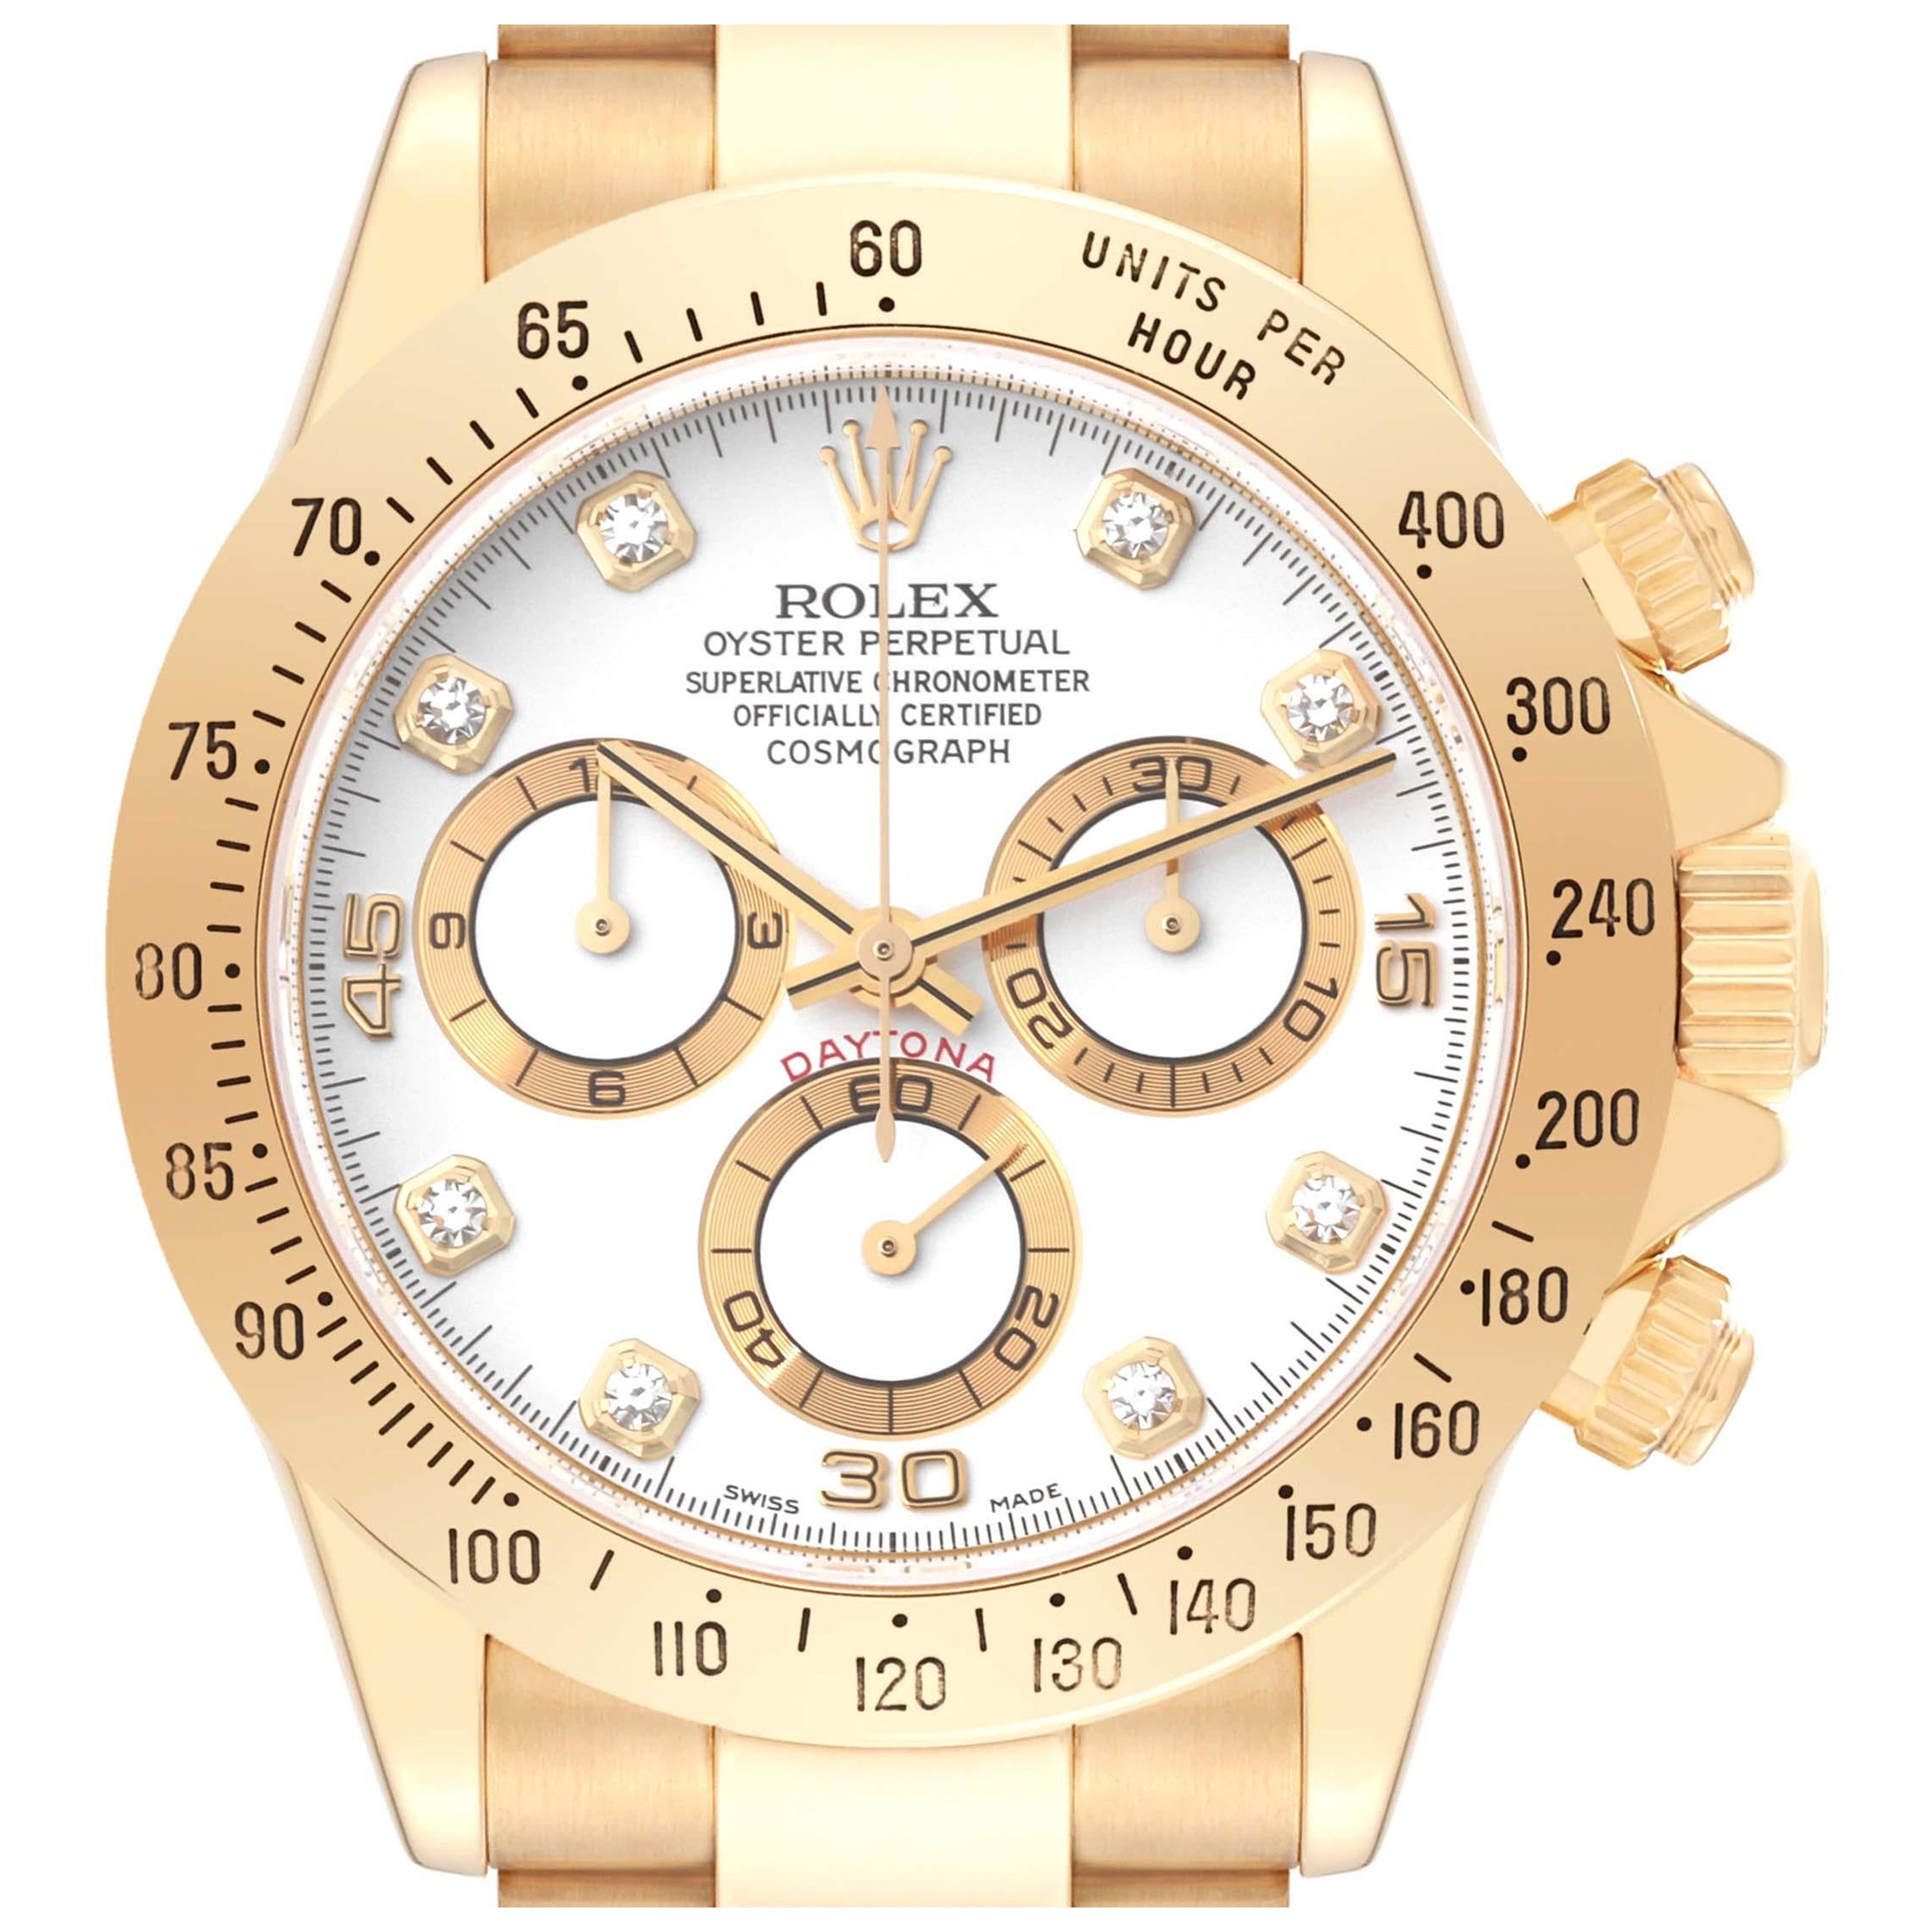 Rolex Daytona Yellow Gold White Diamond Dial Mens Watch 116528 Box Papers For Sale